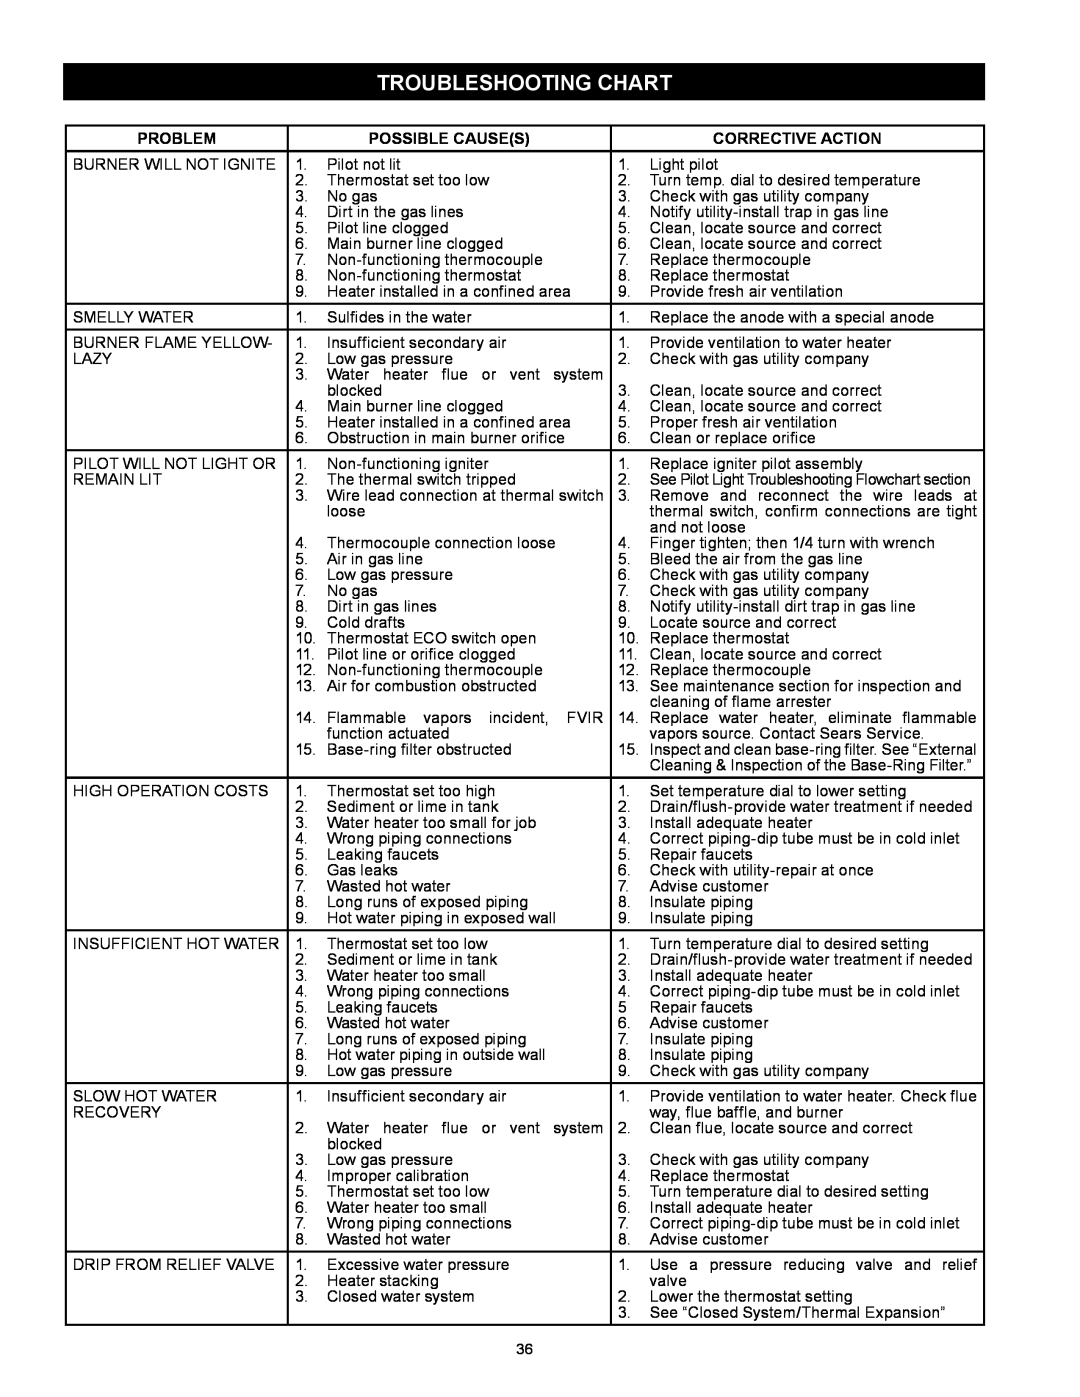 Kenmore 153.332.410 manual Troubleshooting Chart, Problem, Possible Causes, Corrective Action 